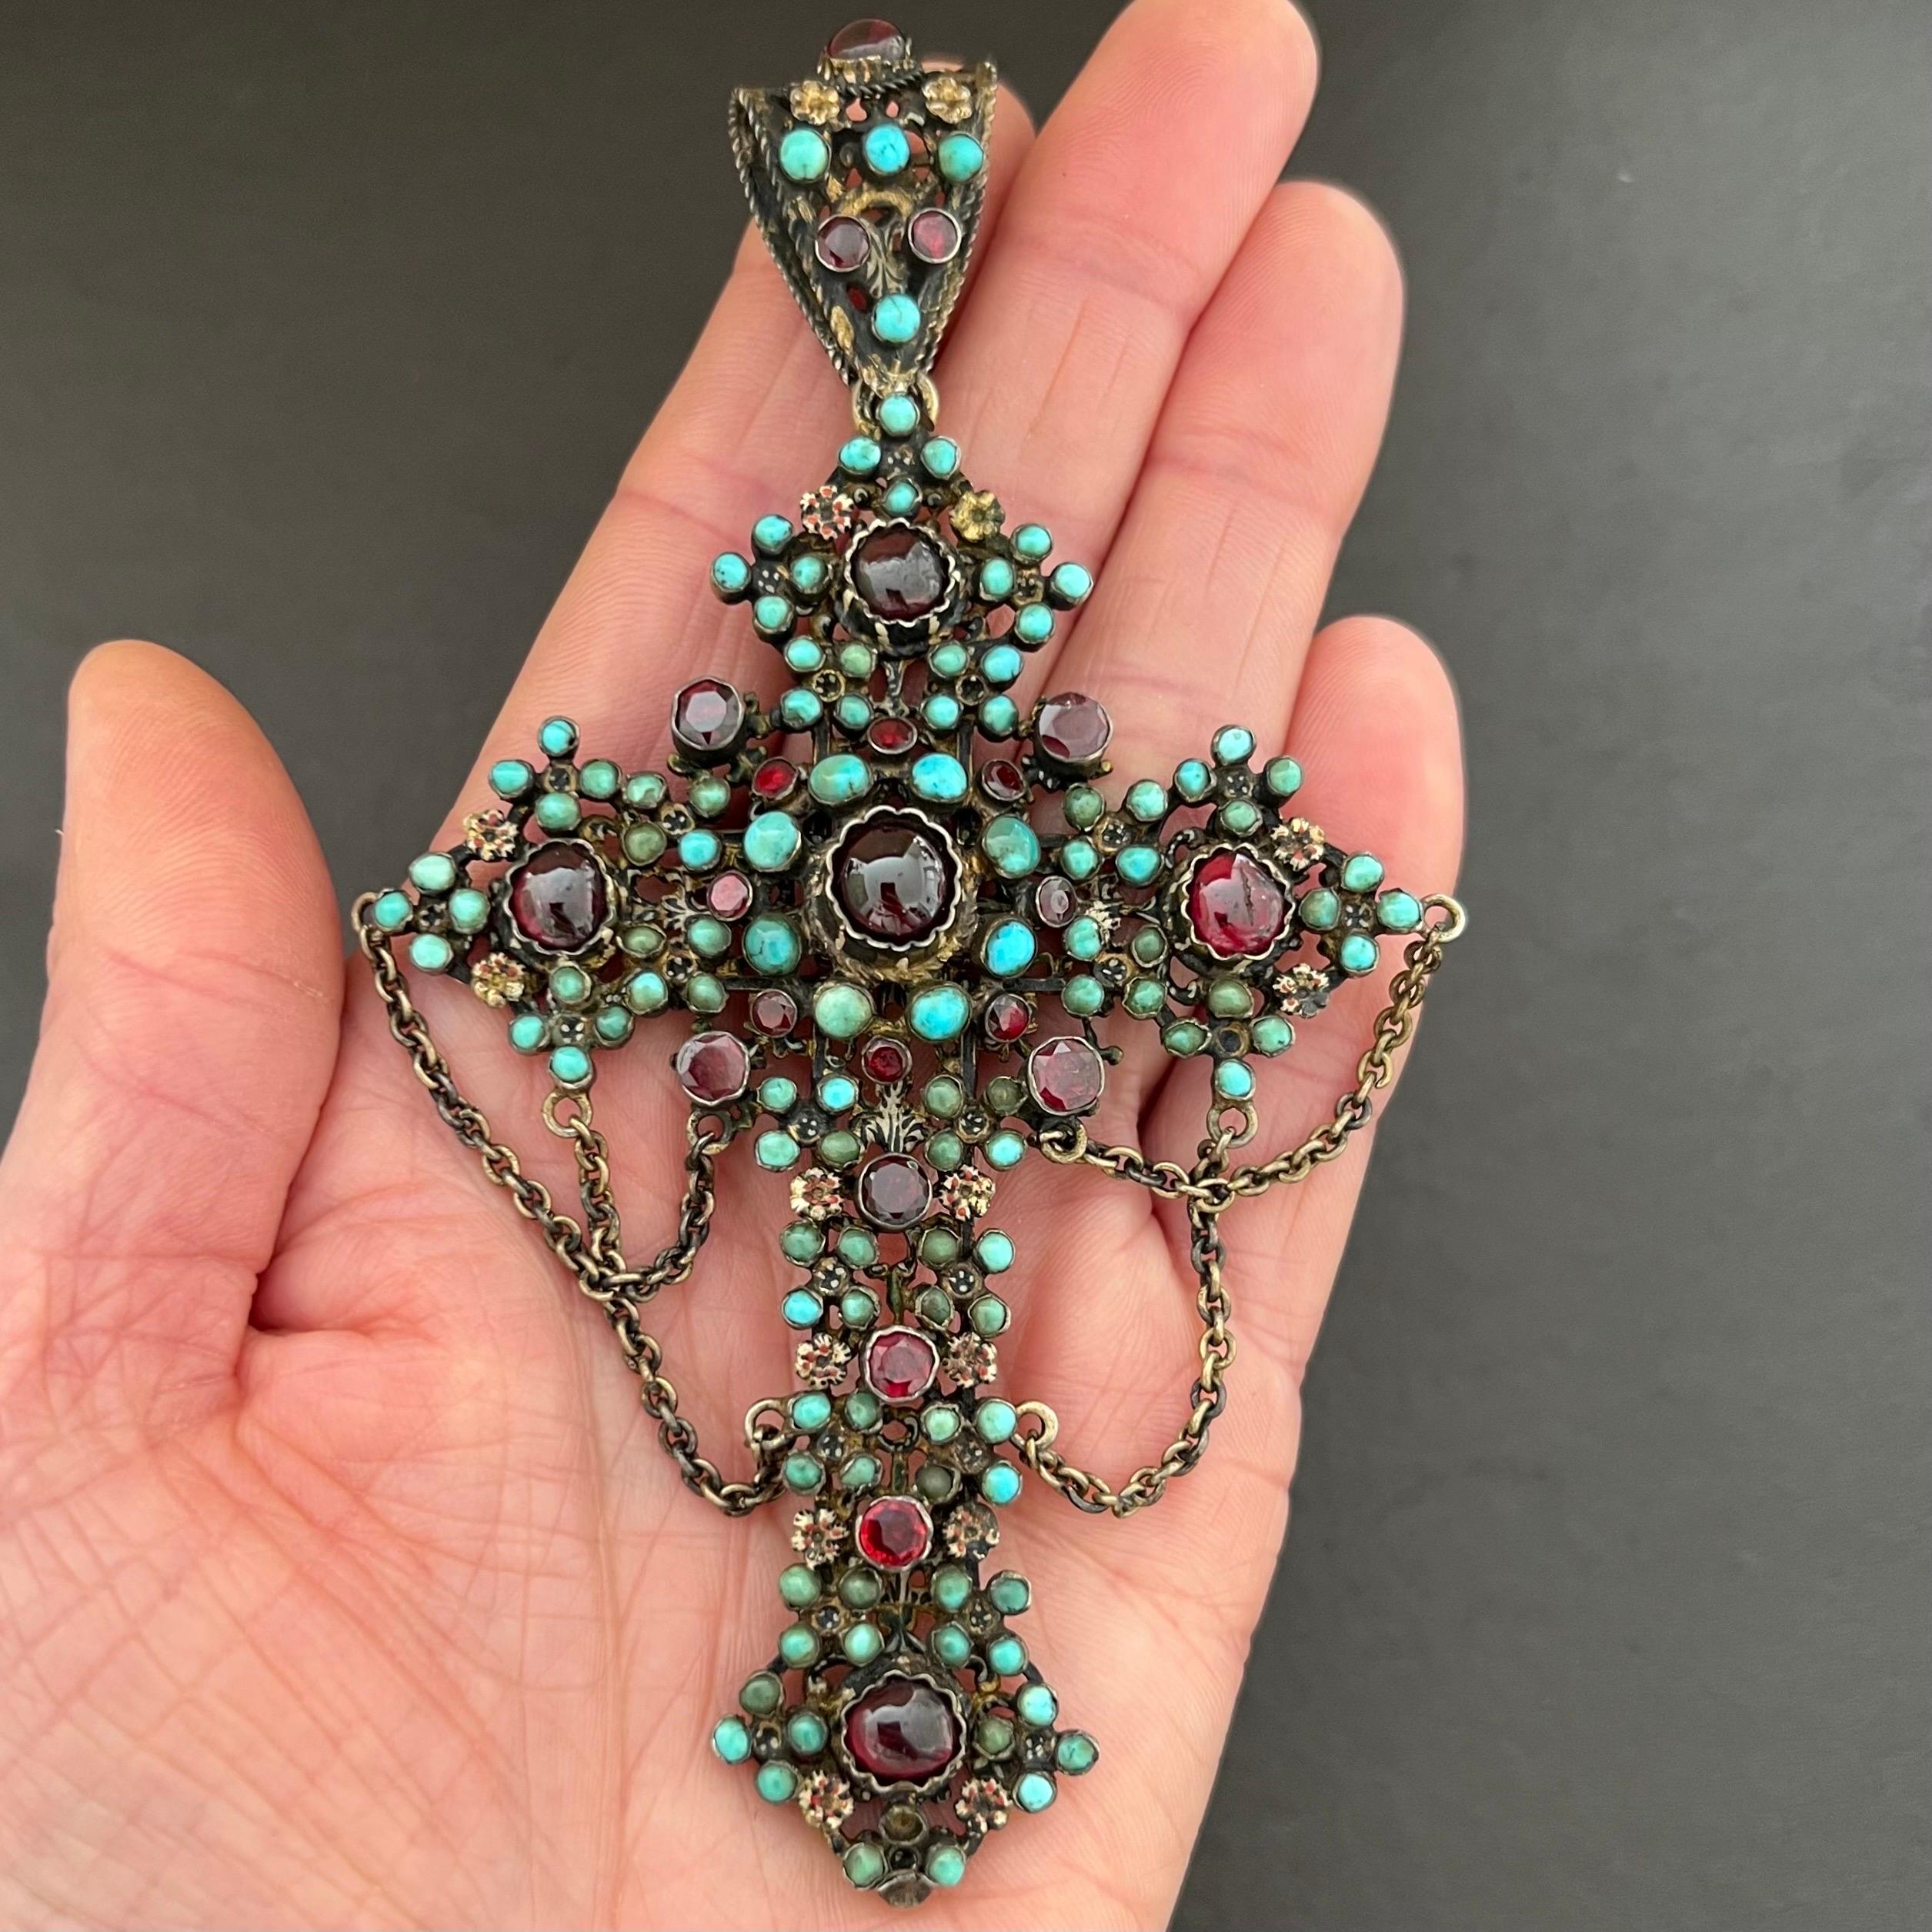 This large 1860's Austro-Hungarian antique cross pendant is set with many turquoise and garnet gemstones. The four cabochon cut garnet stones on front of the cross are all set in raised cut down collets, the other garnet stones are faceted and bezel